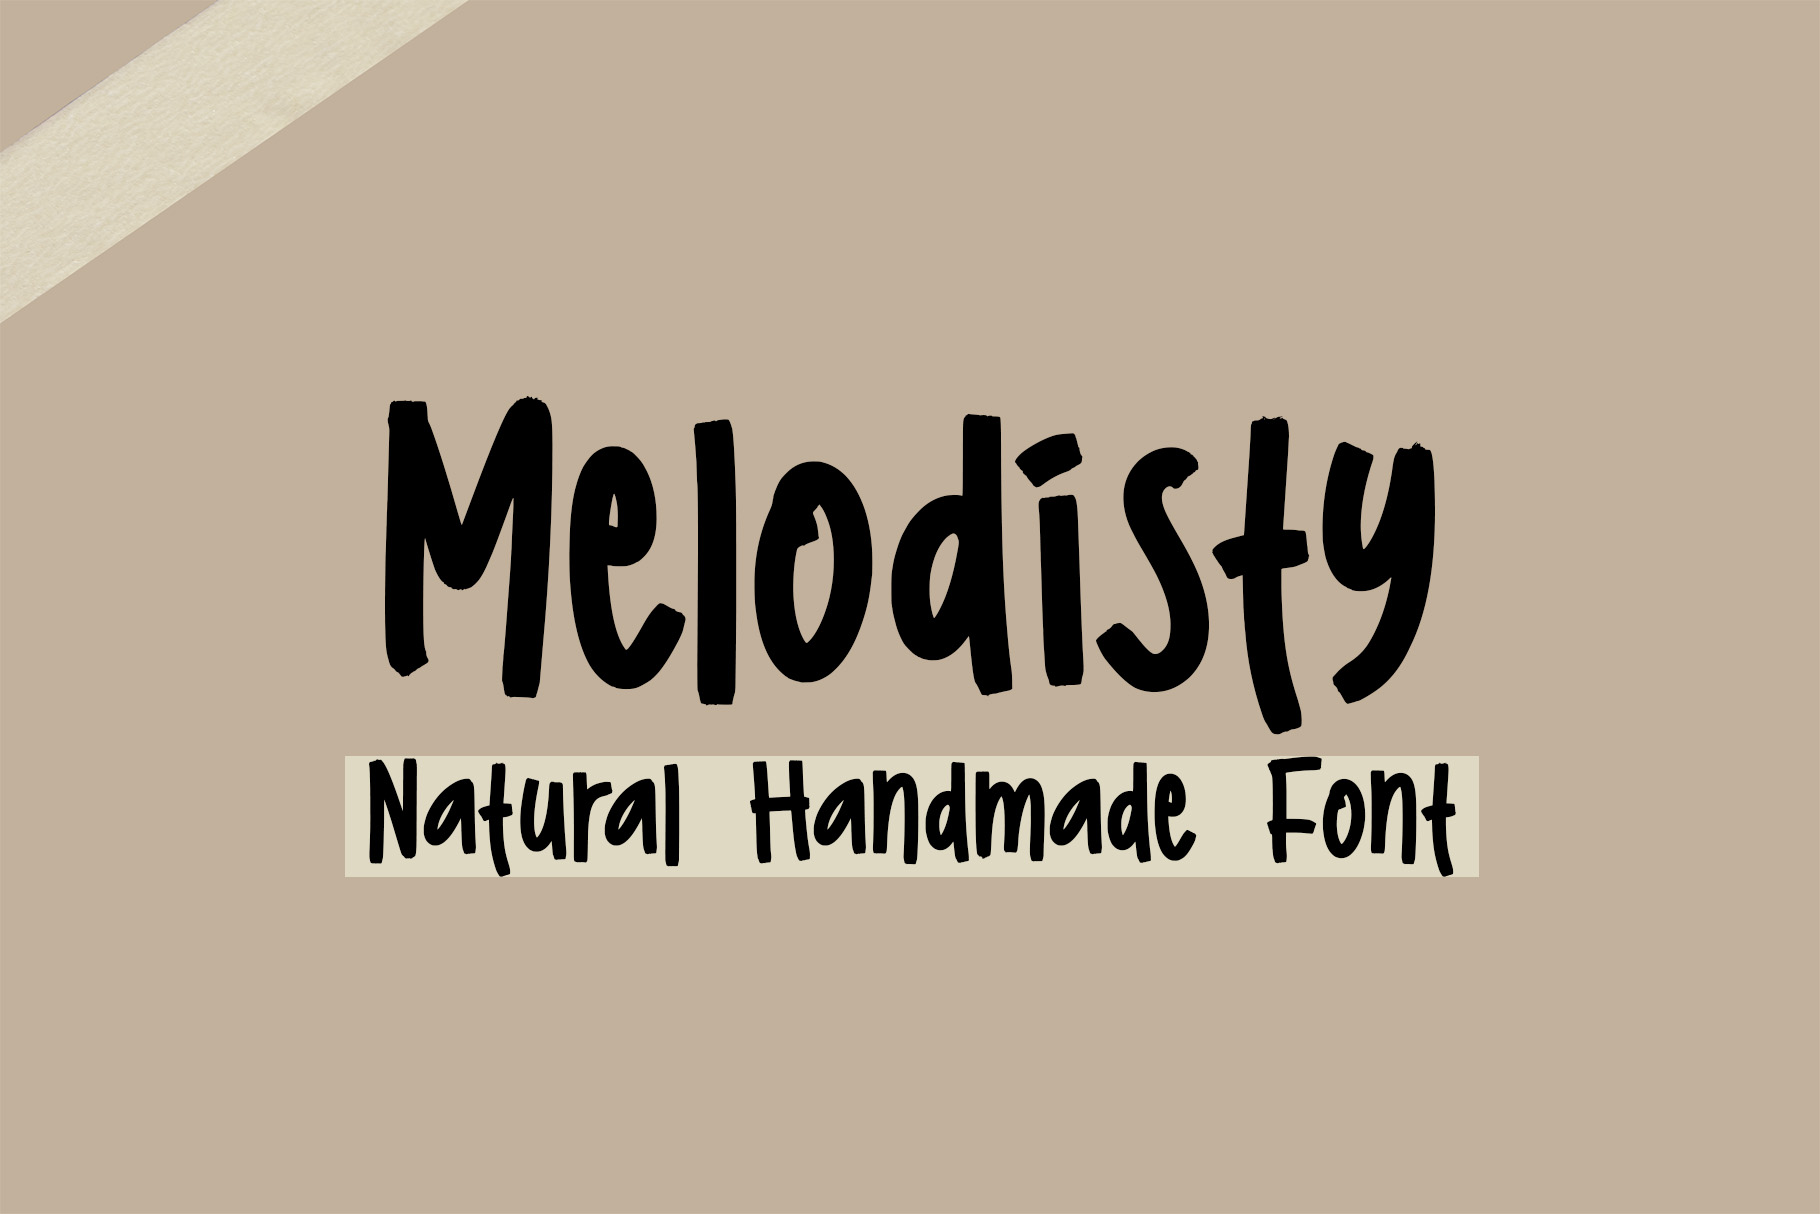 Melodisty - Personal Use